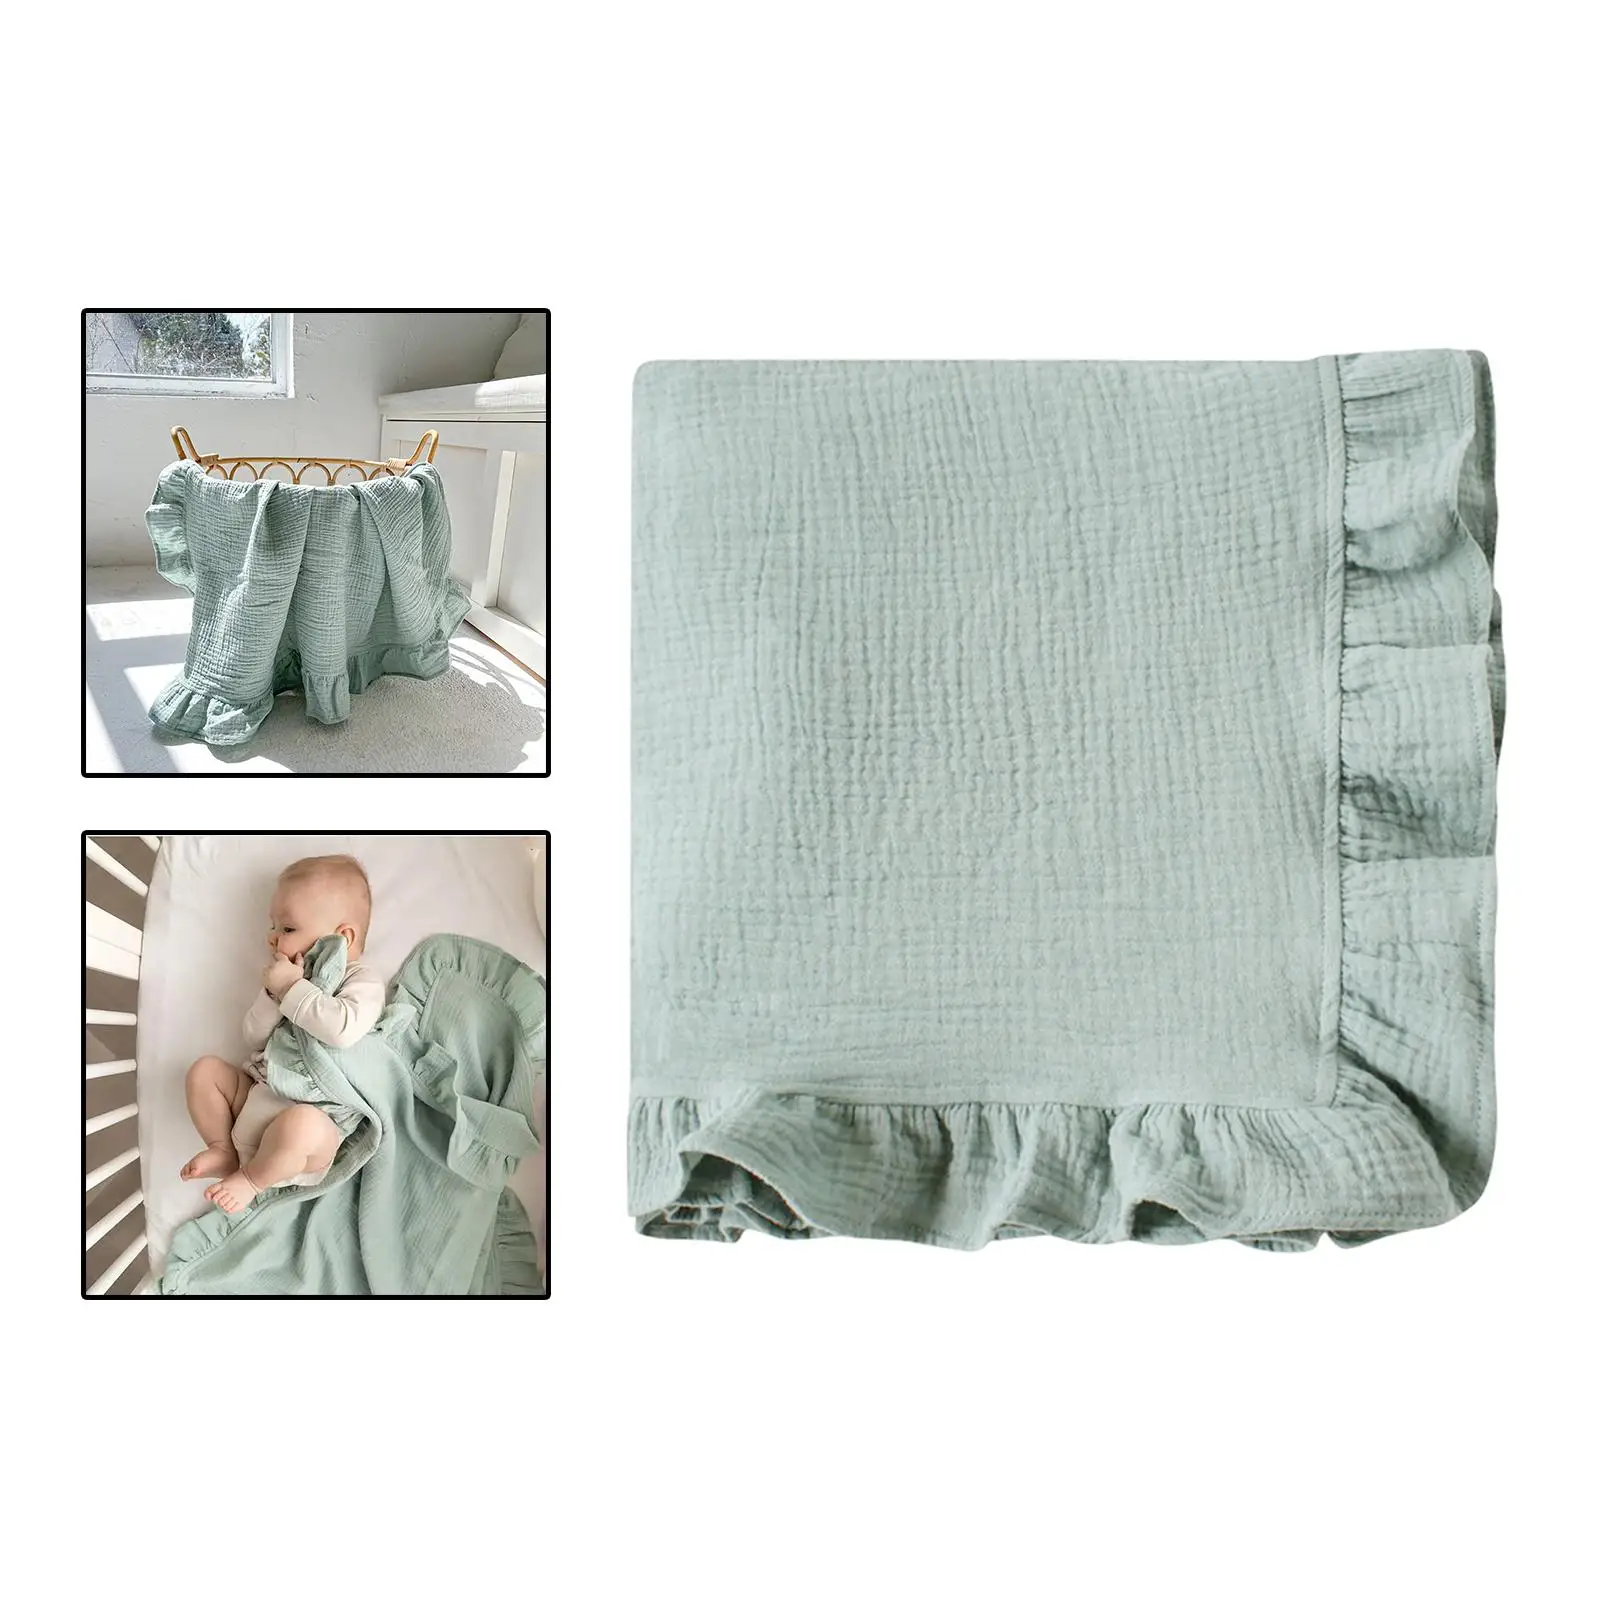 Soft Swaddling Bedding Blanket Cover Burping Cloth Receiving Blanket Photo Props Gifts